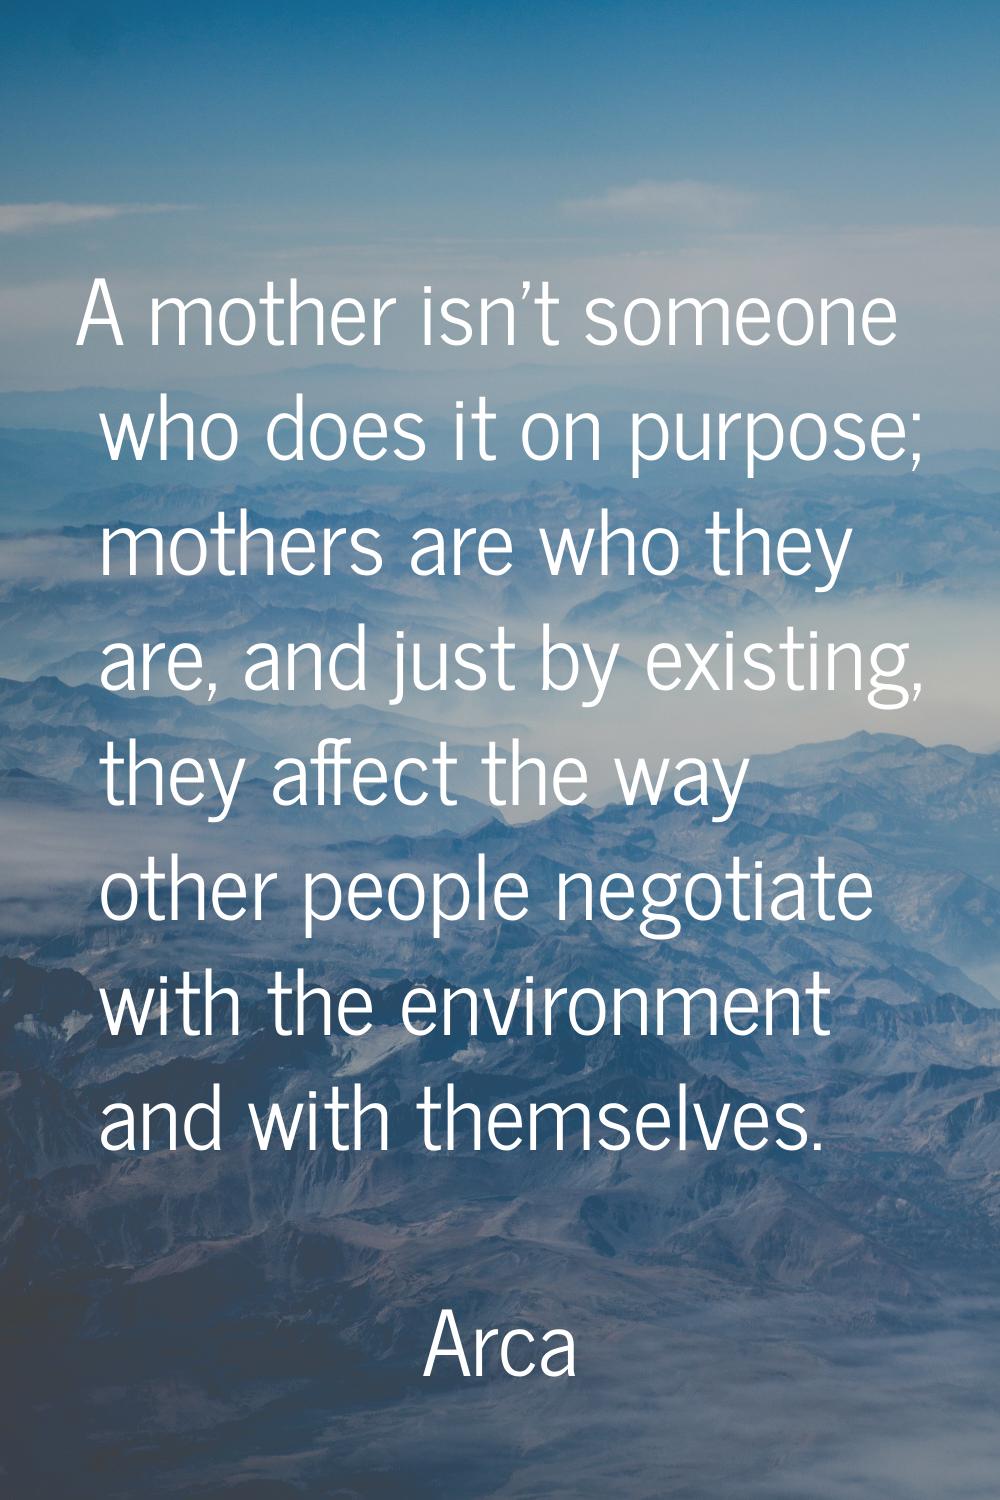 A mother isn't someone who does it on purpose; mothers are who they are, and just by existing, they